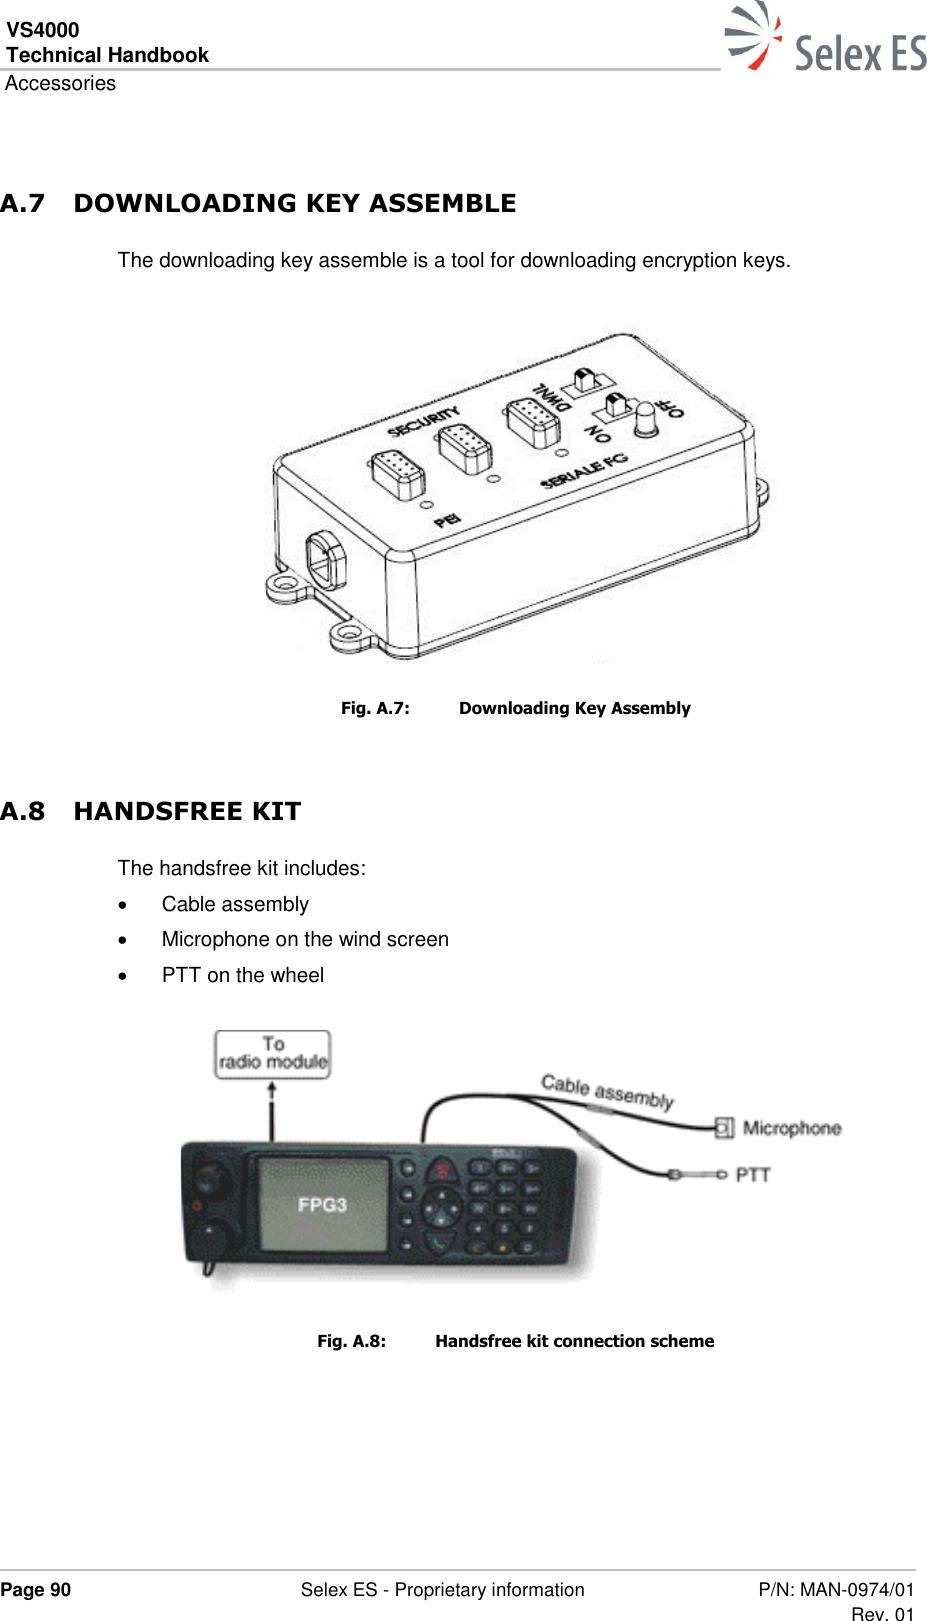 VS4000 Technical Handbook  Accessories  Page 90  Selex ES - Proprietary information P/N: MAN-0974/01 Rev. 01  A.7 DOWNLOADING KEY ASSEMBLE The downloading key assemble is a tool for downloading encryption keys.   Fig. A.7:  Downloading Key Assembly A.8 HANDSFREE KIT The handsfree kit includes:   Cable assembly    Microphone on the wind screen    PTT on the wheel   Fig. A.8:  Handsfree kit connection scheme 